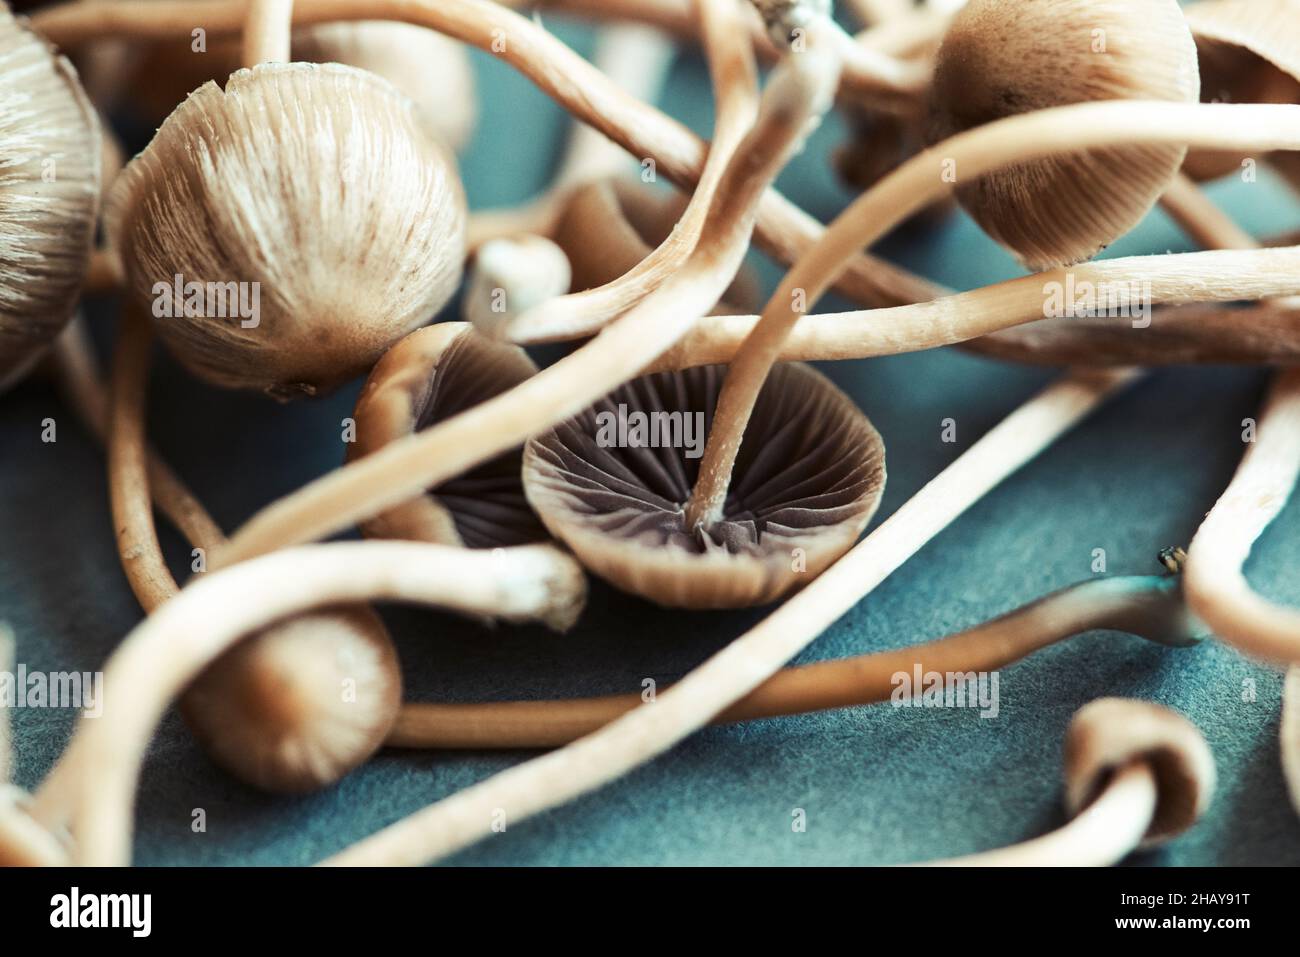 Close-up of fresh psychedelic mushrooms (Psilocybe mexicana) on a table Stock Photo